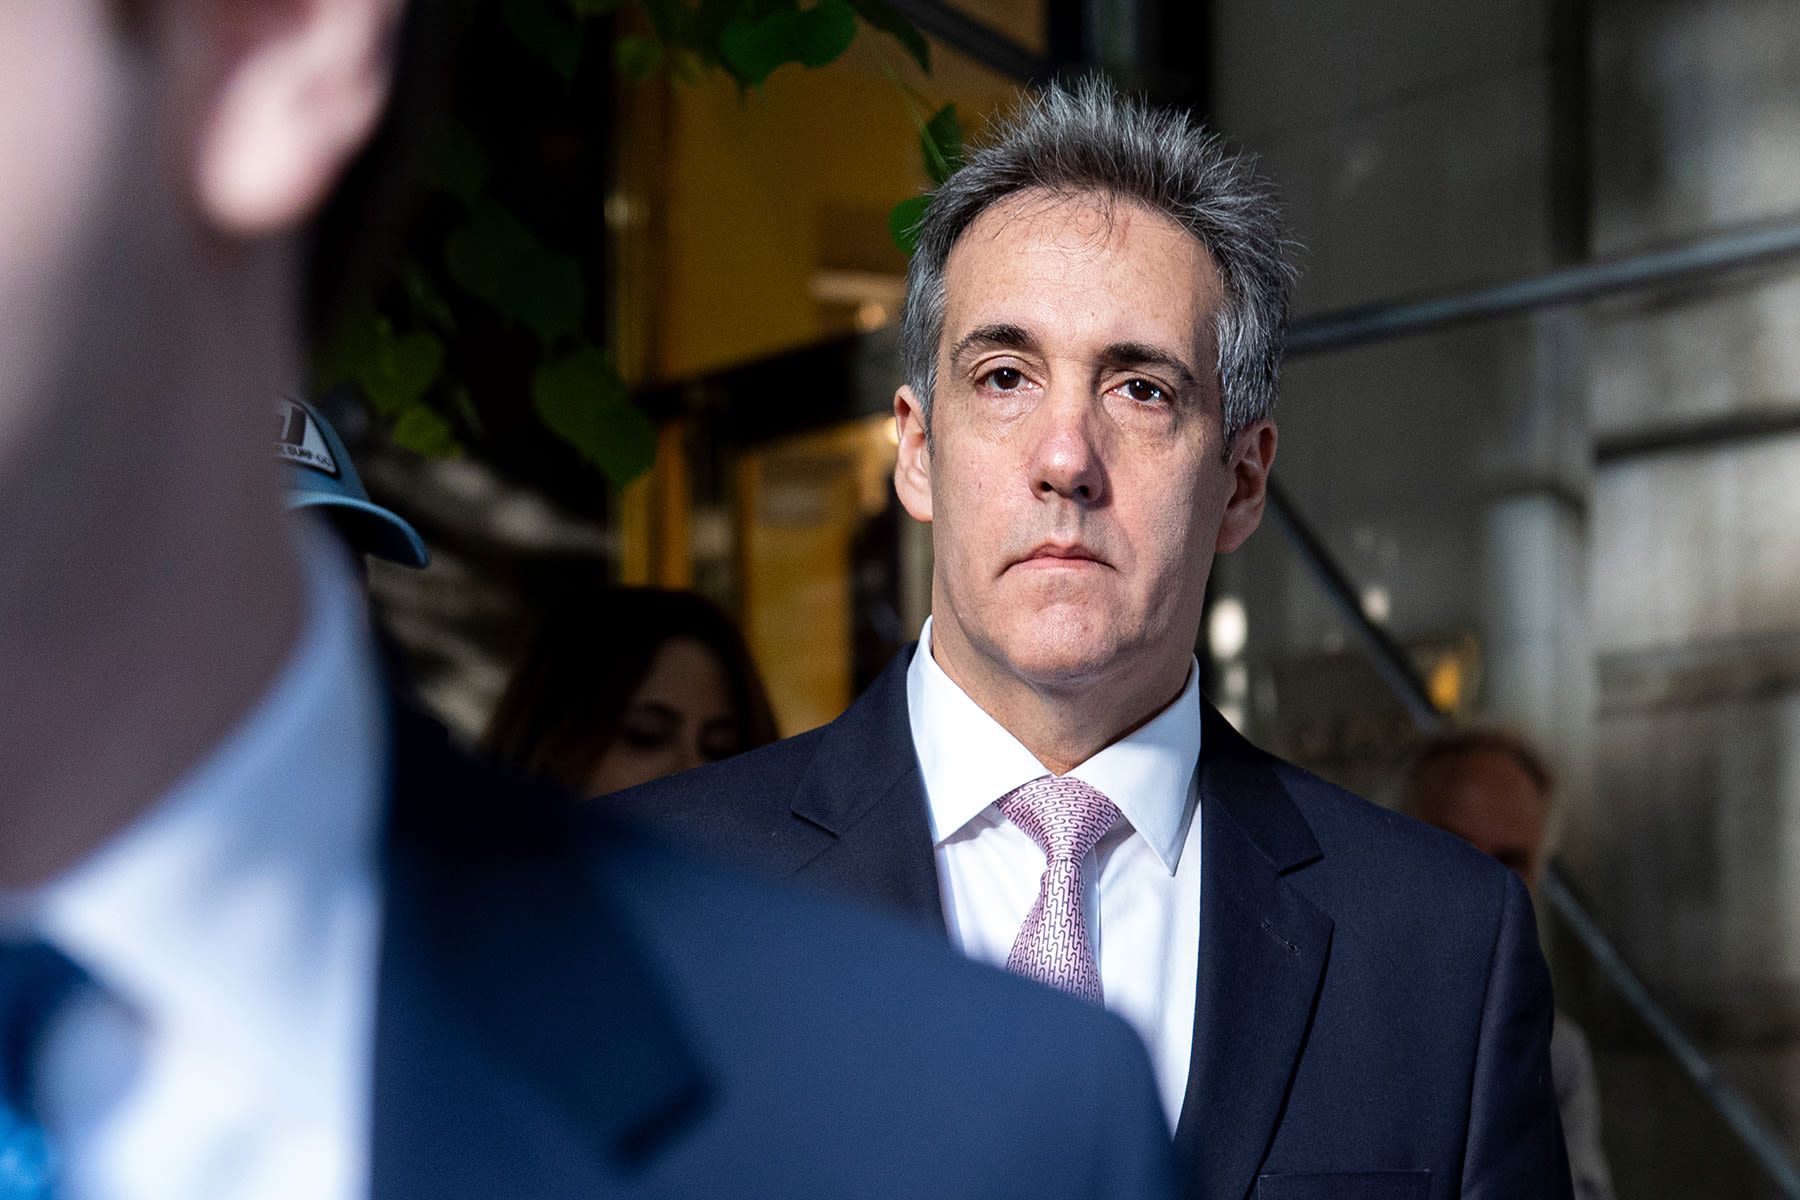 Michael Cohen Says Trump Warned That ‘a Lot’ of Women Would Come Forward